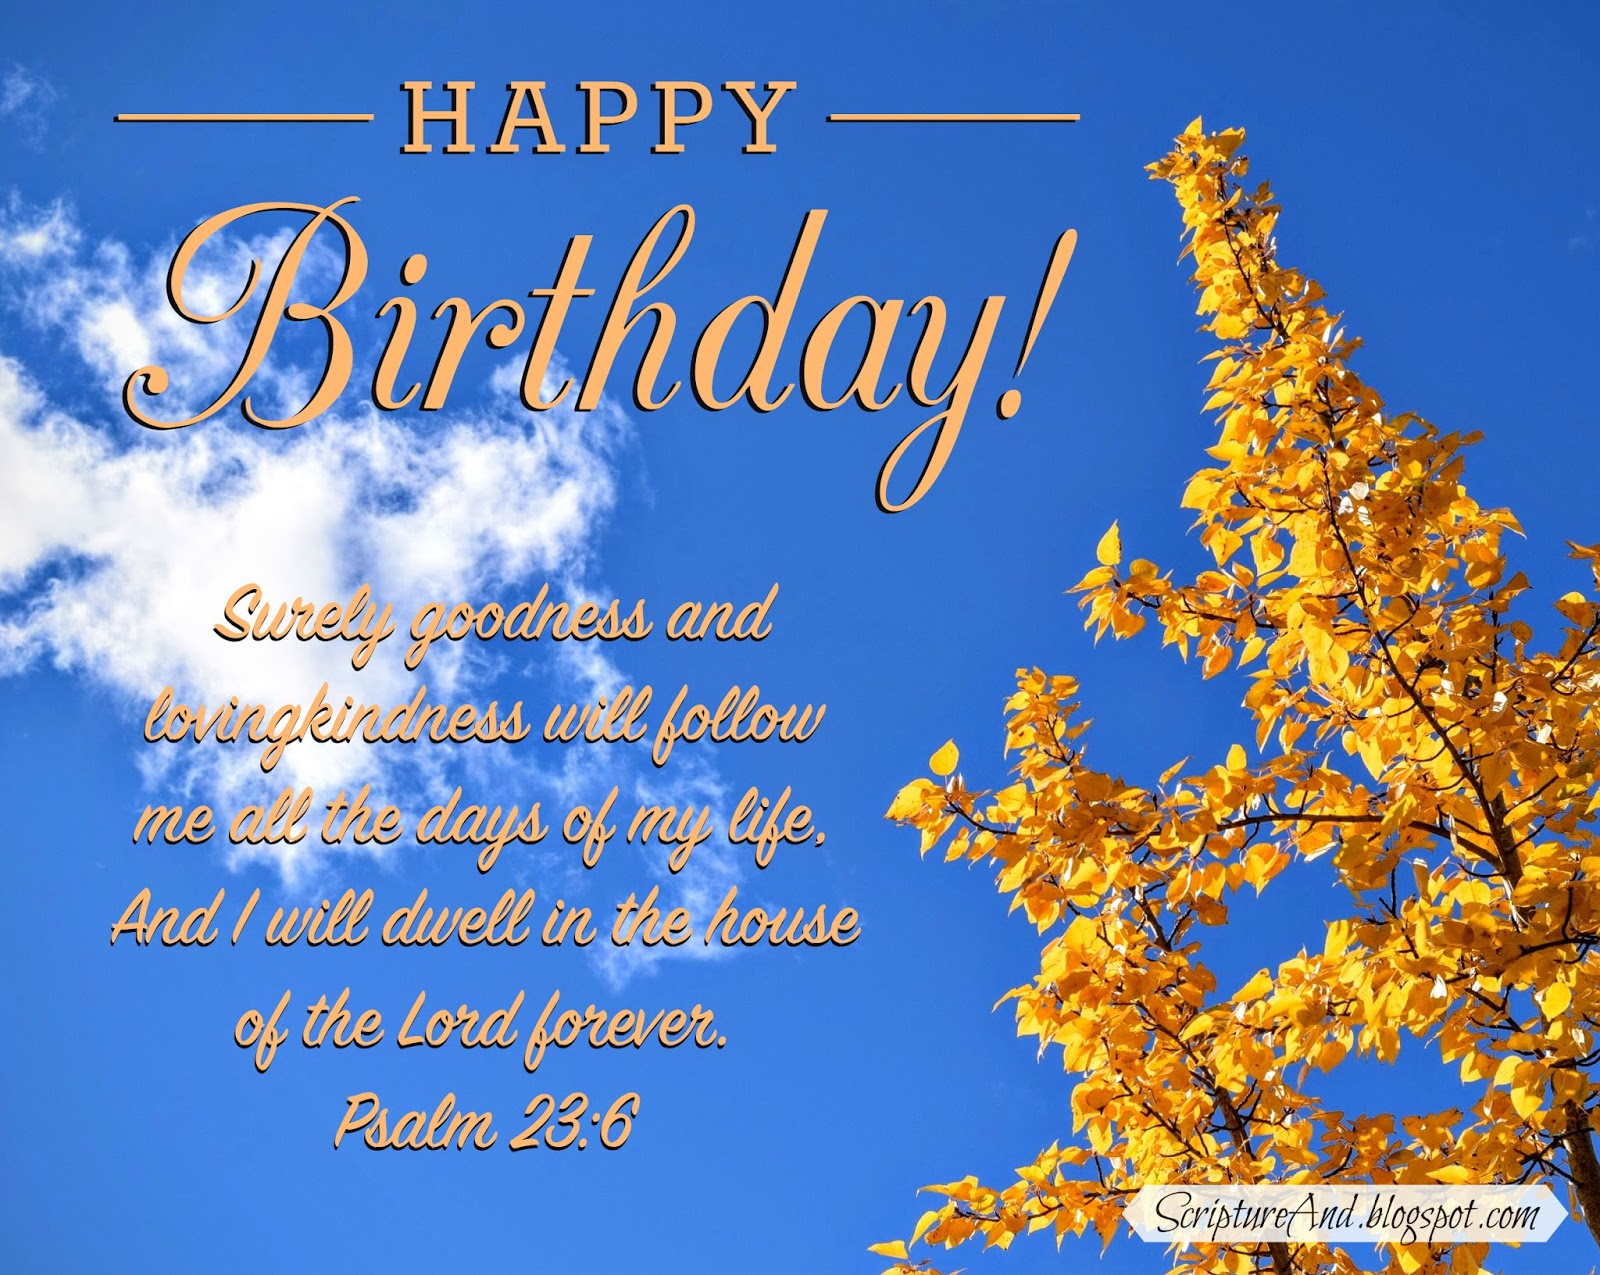 Scripture And Free Birthday Images With Bible Verses